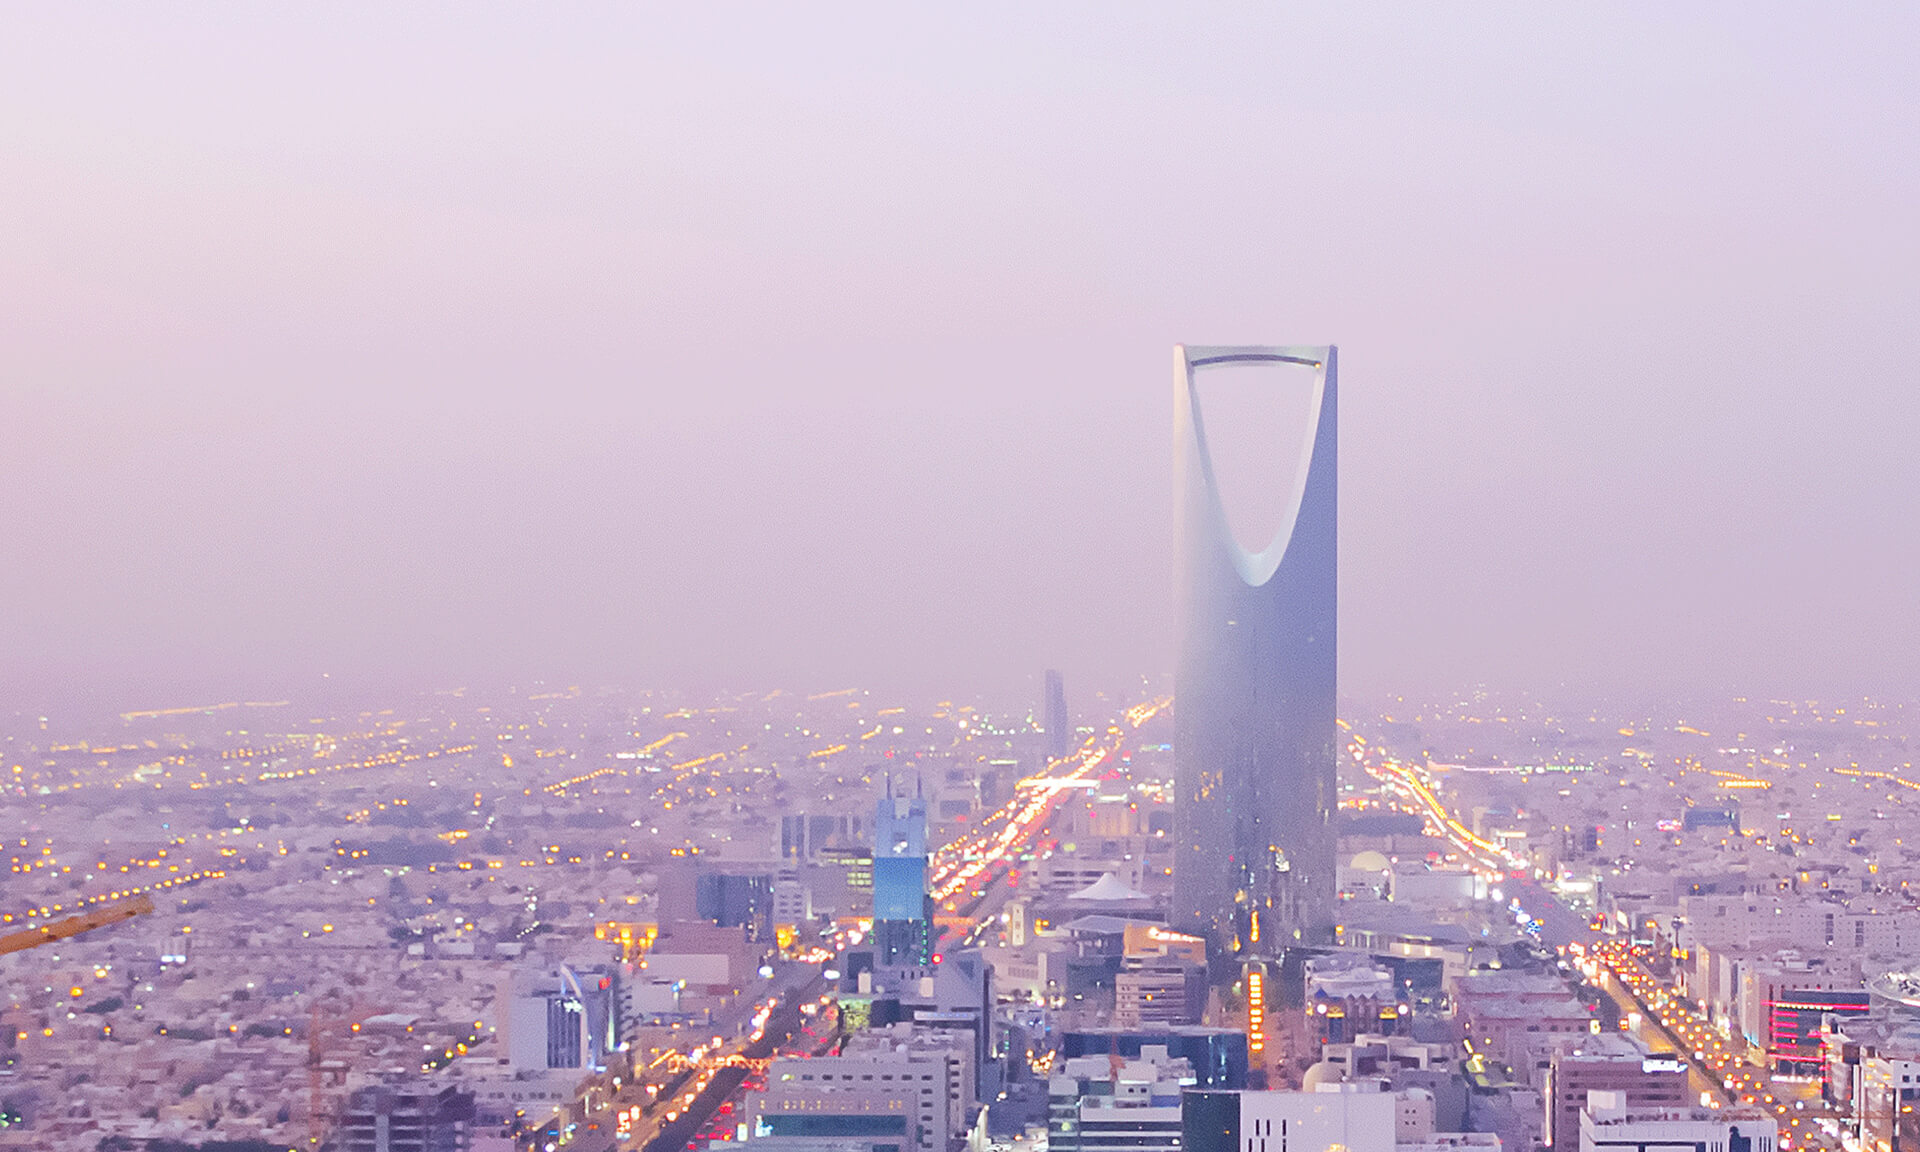 Saudi’s recent Bankruptcy law clears the path for investments and large-scale projects